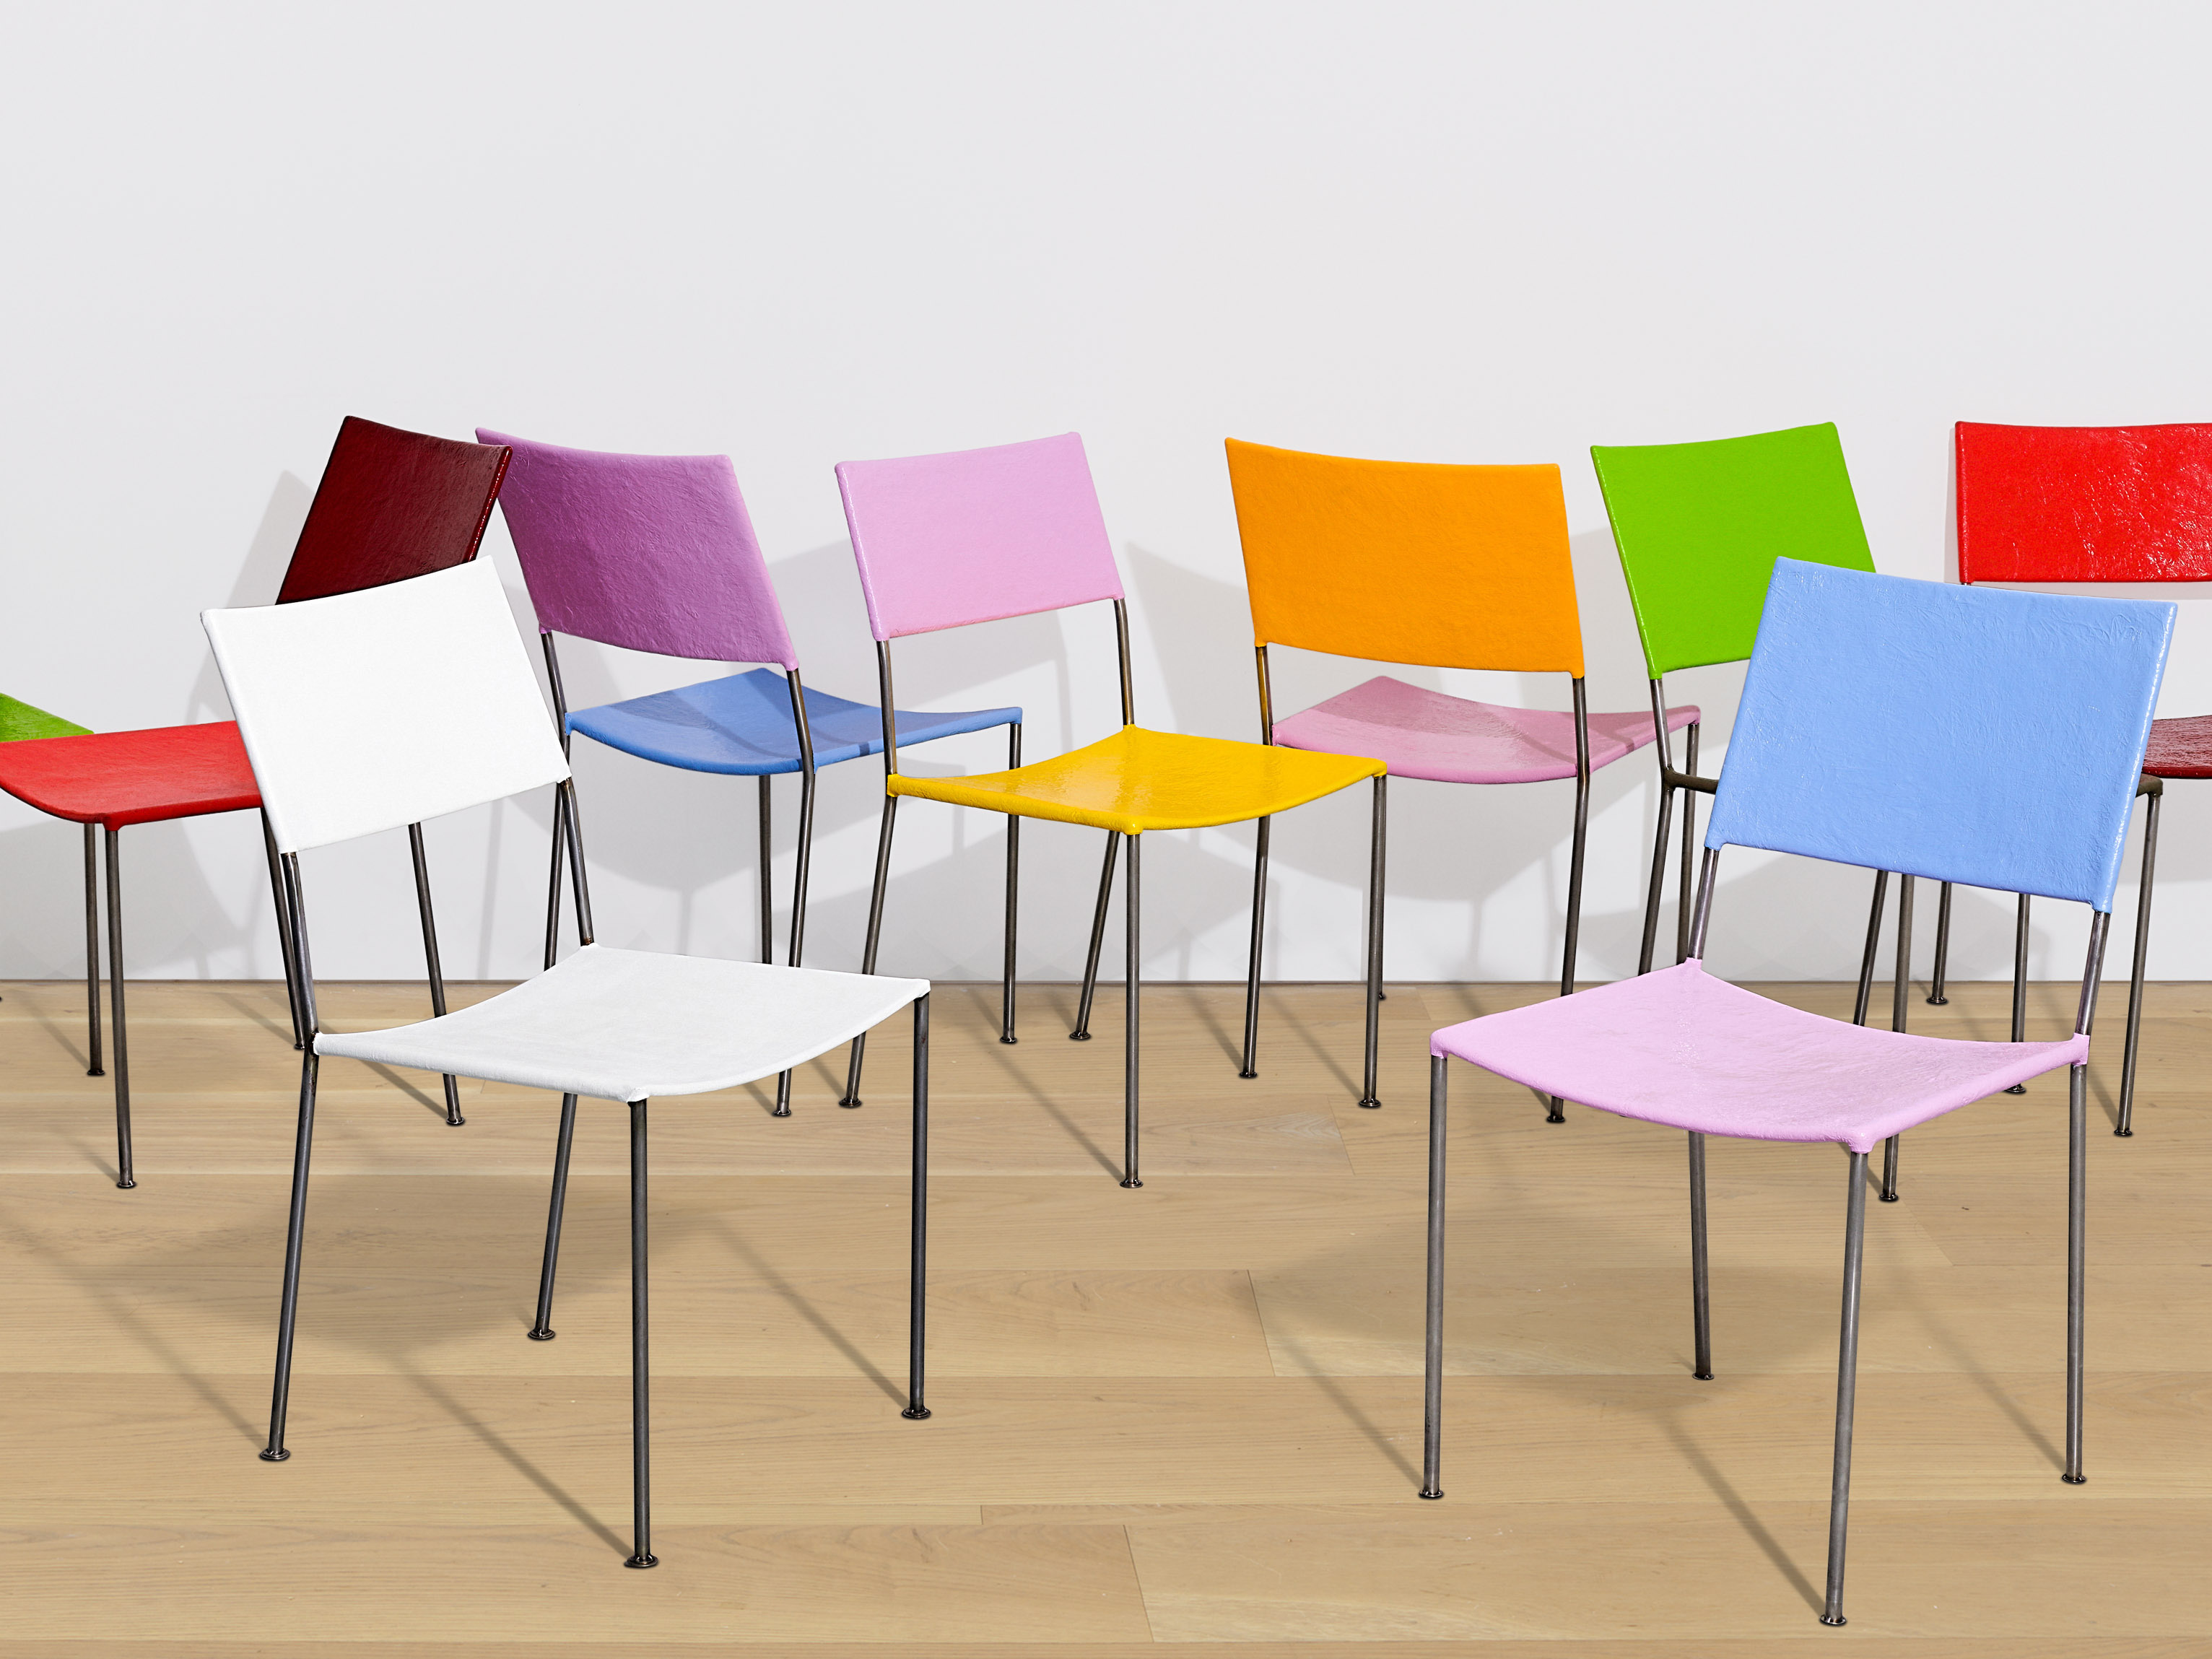 A selection of chairs by Franz West.